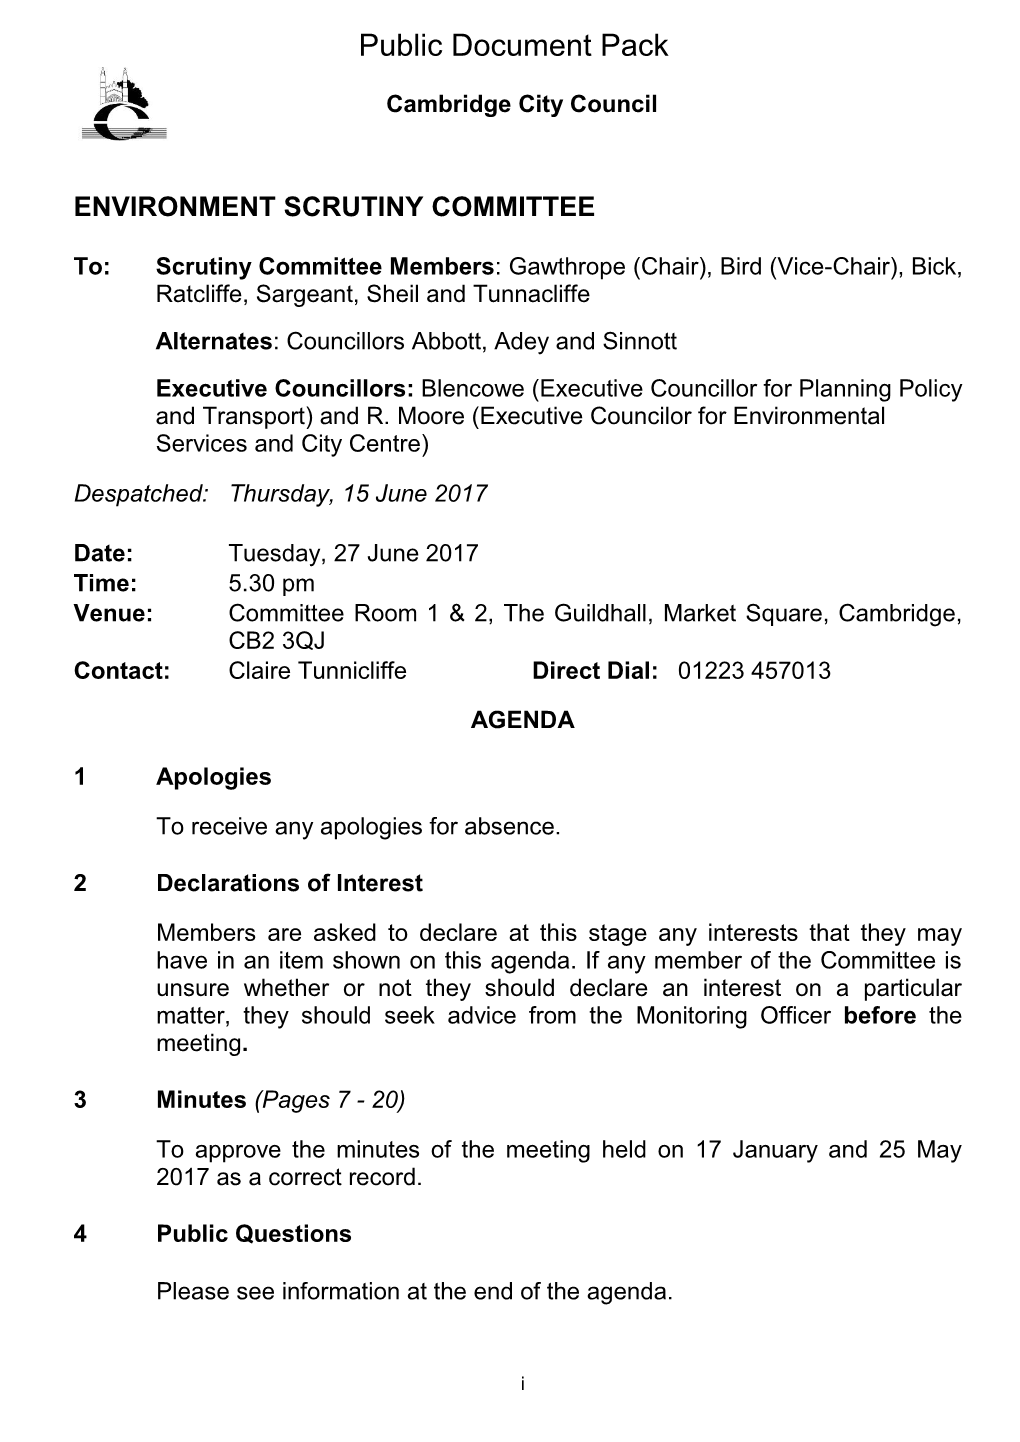 (Public Pack)Agenda Document for Environment Scrutiny Committee